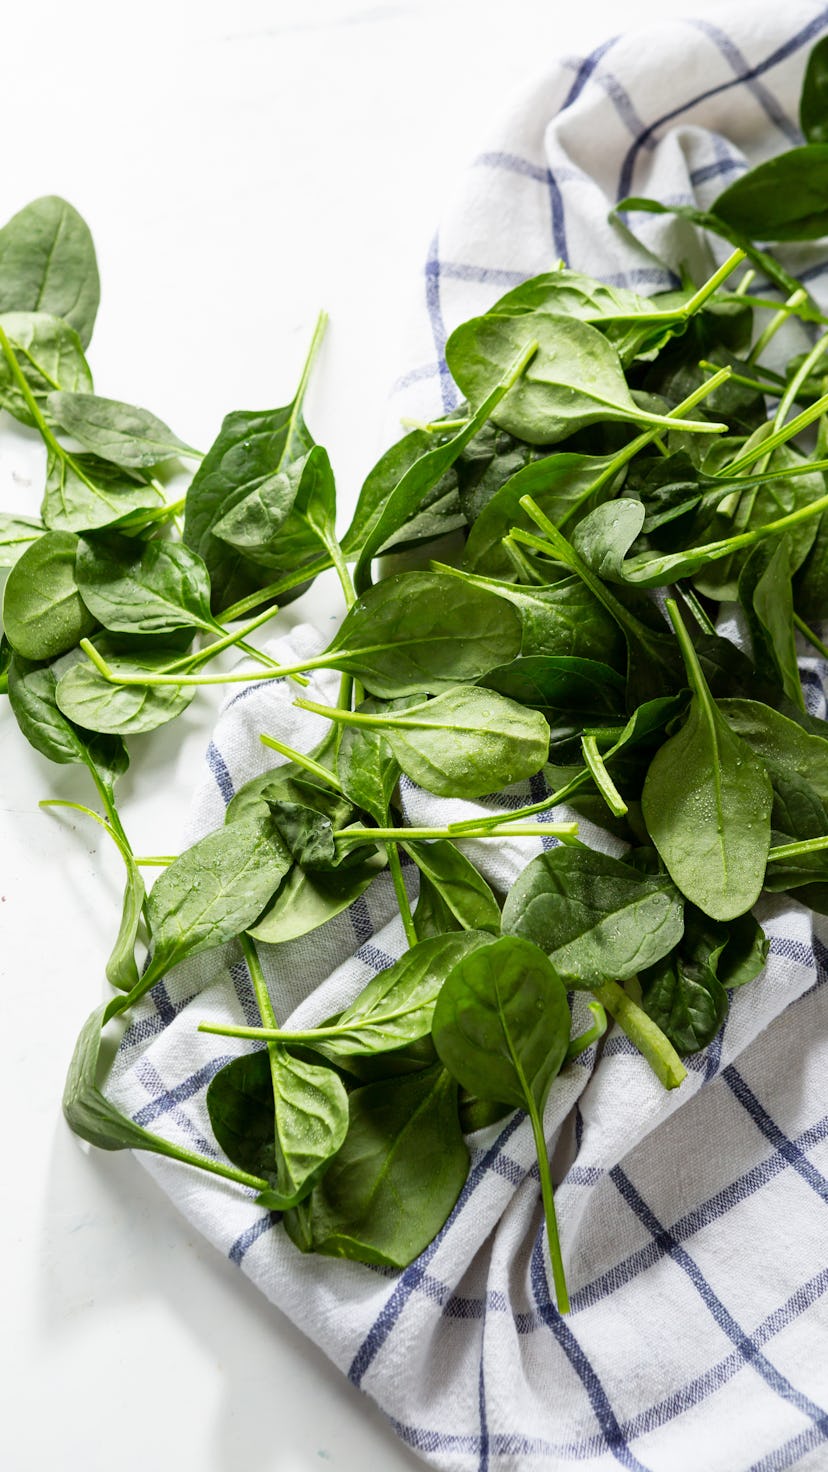 Organic spinach baby leaves on kitchen towel, healthy food